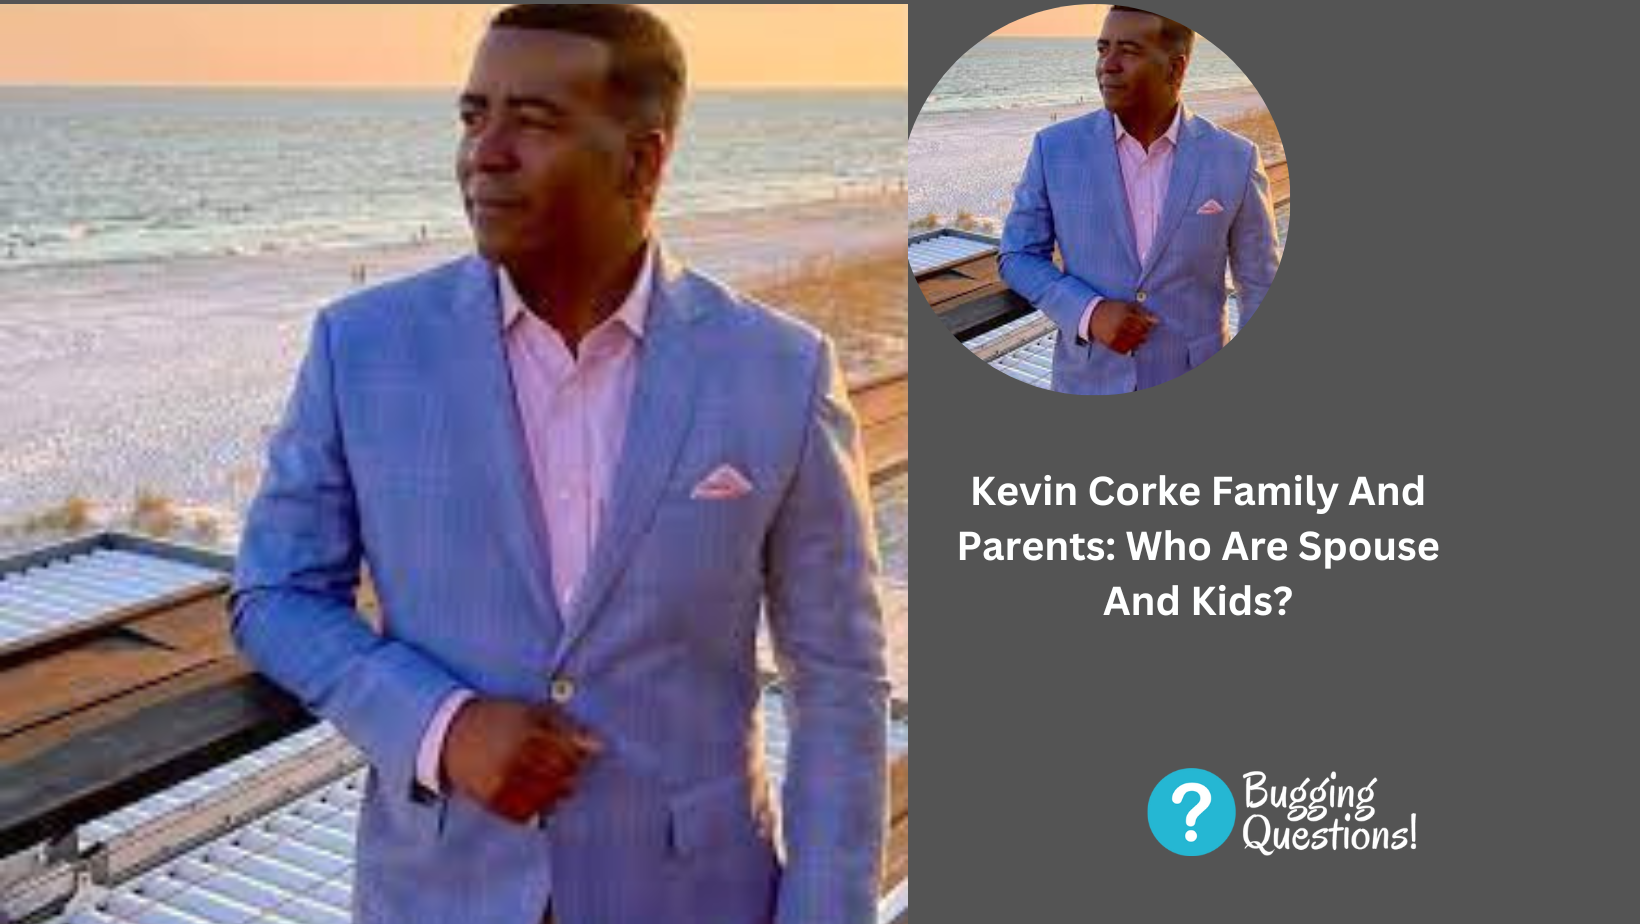 Kevin Corke Family And Parents: Who Are Spouse And Kids?